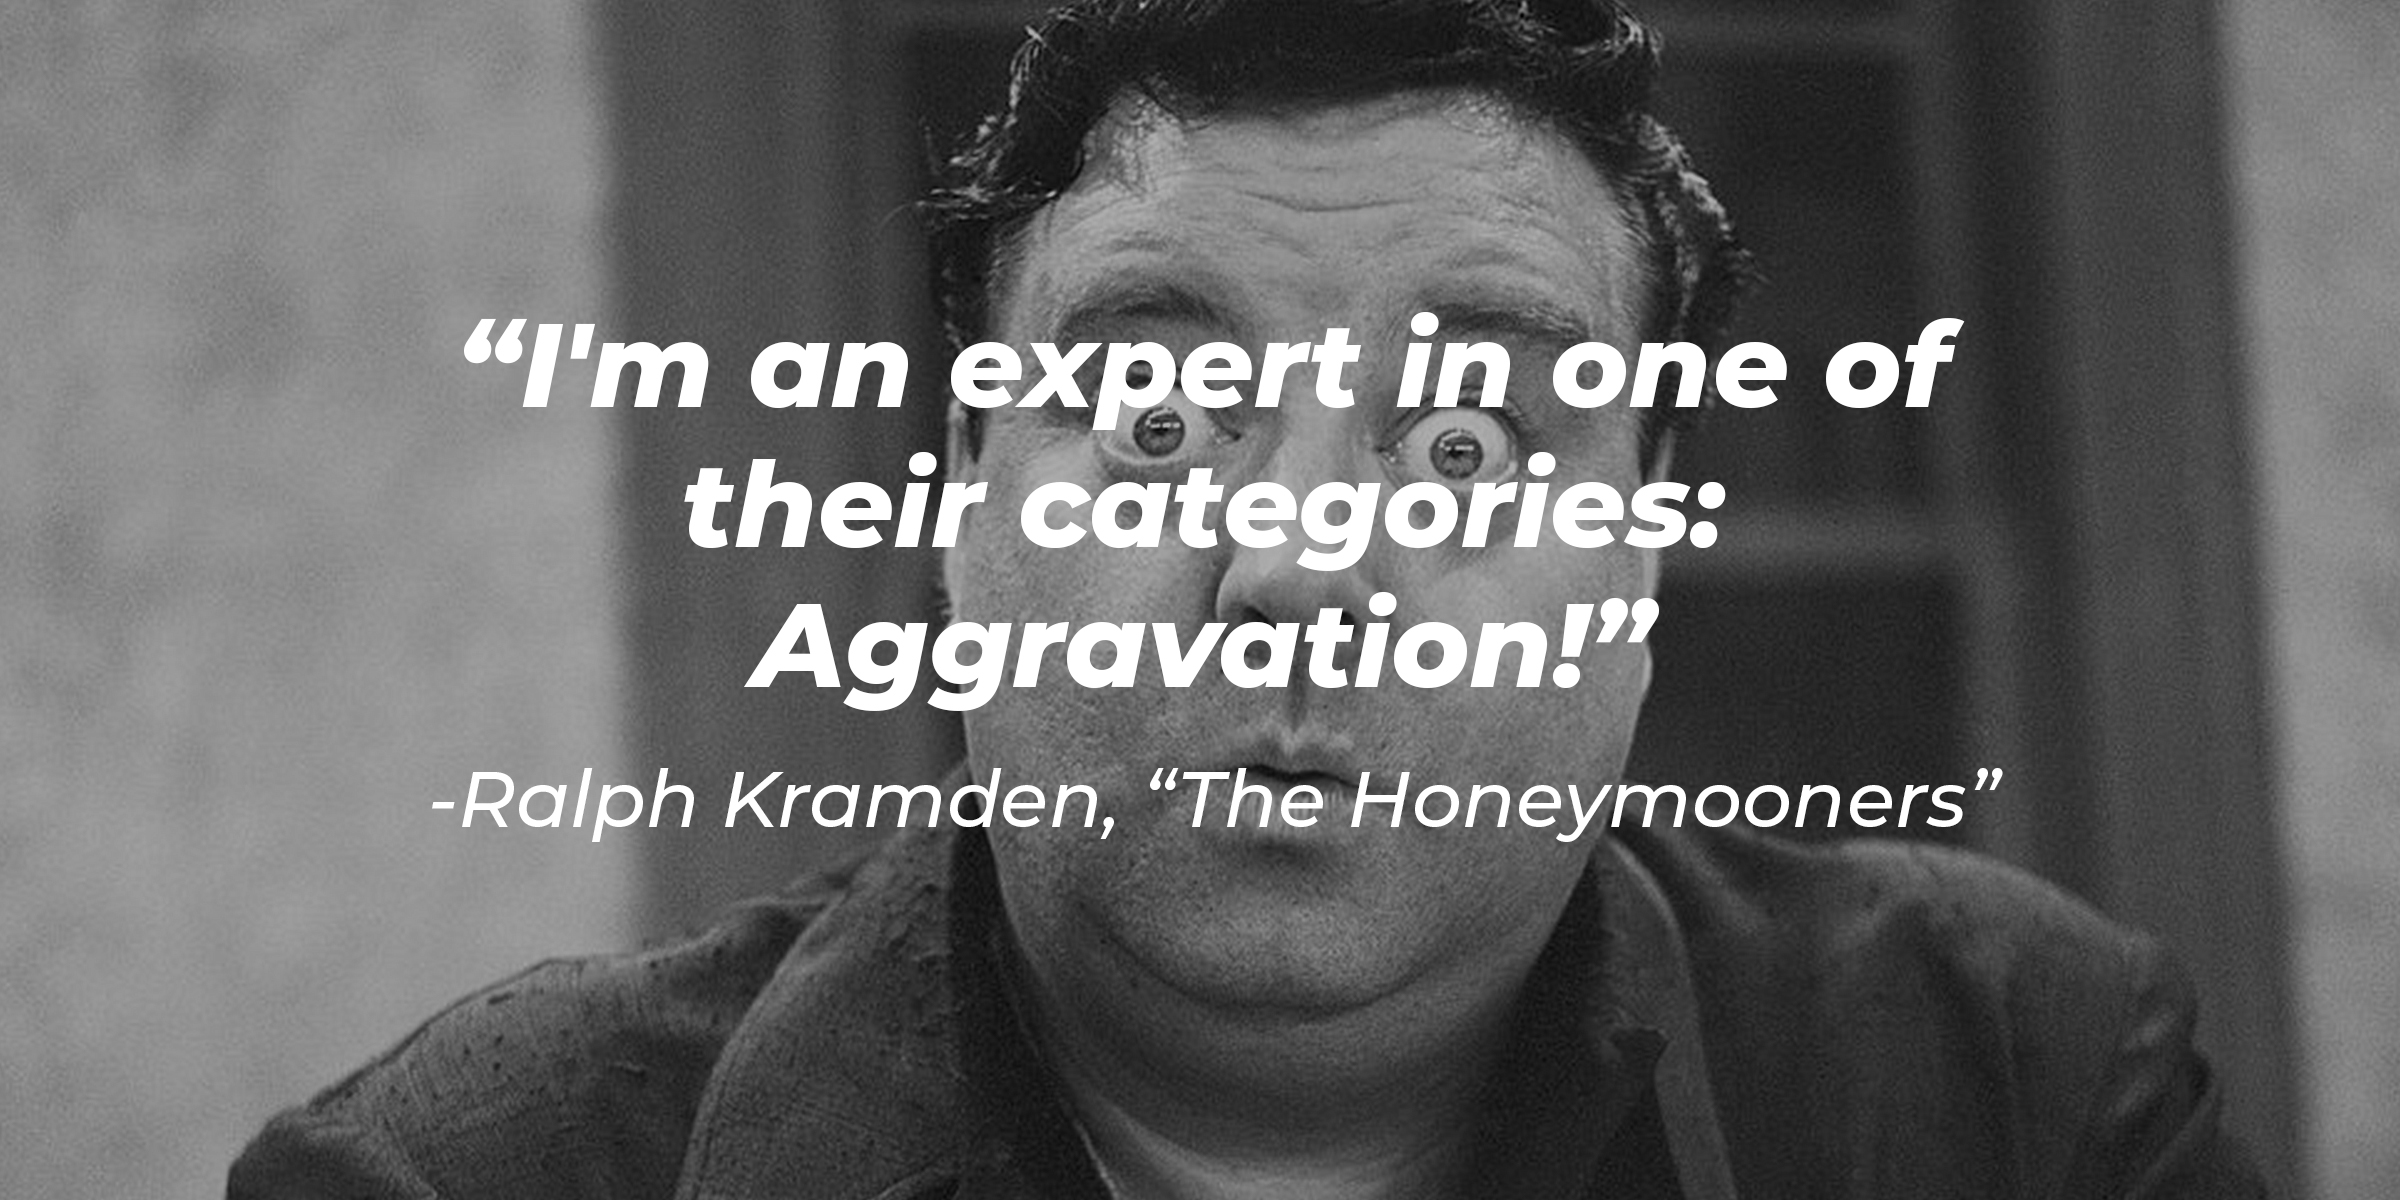 An image of Ralph Kramden from "The Honeymooners" with the quote, "I'm an expert in one of their categories: Aggravation!" | Source: Getty Images